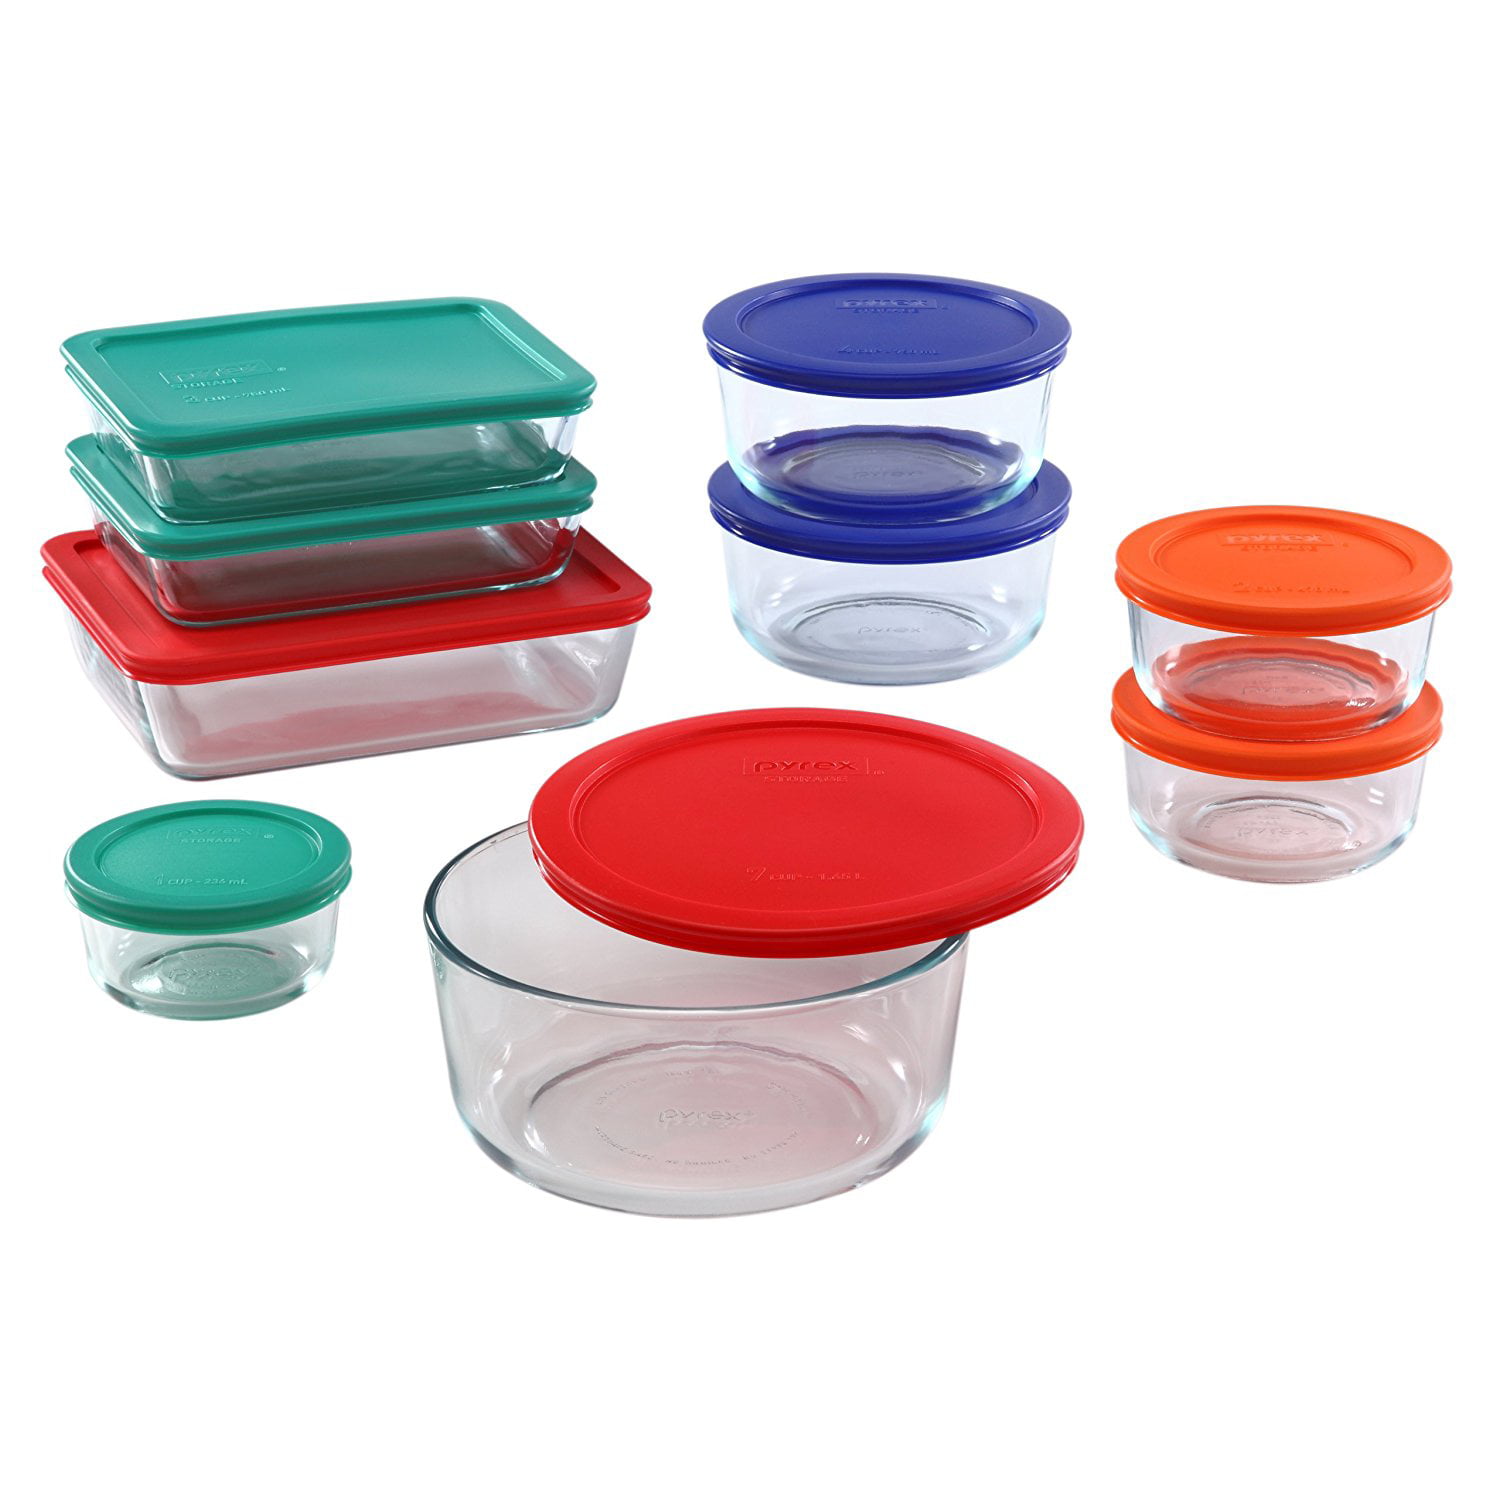 Pyrex Simply Store Teal 4 Cup Food Storage Set 2 Containers and 2 Lids 